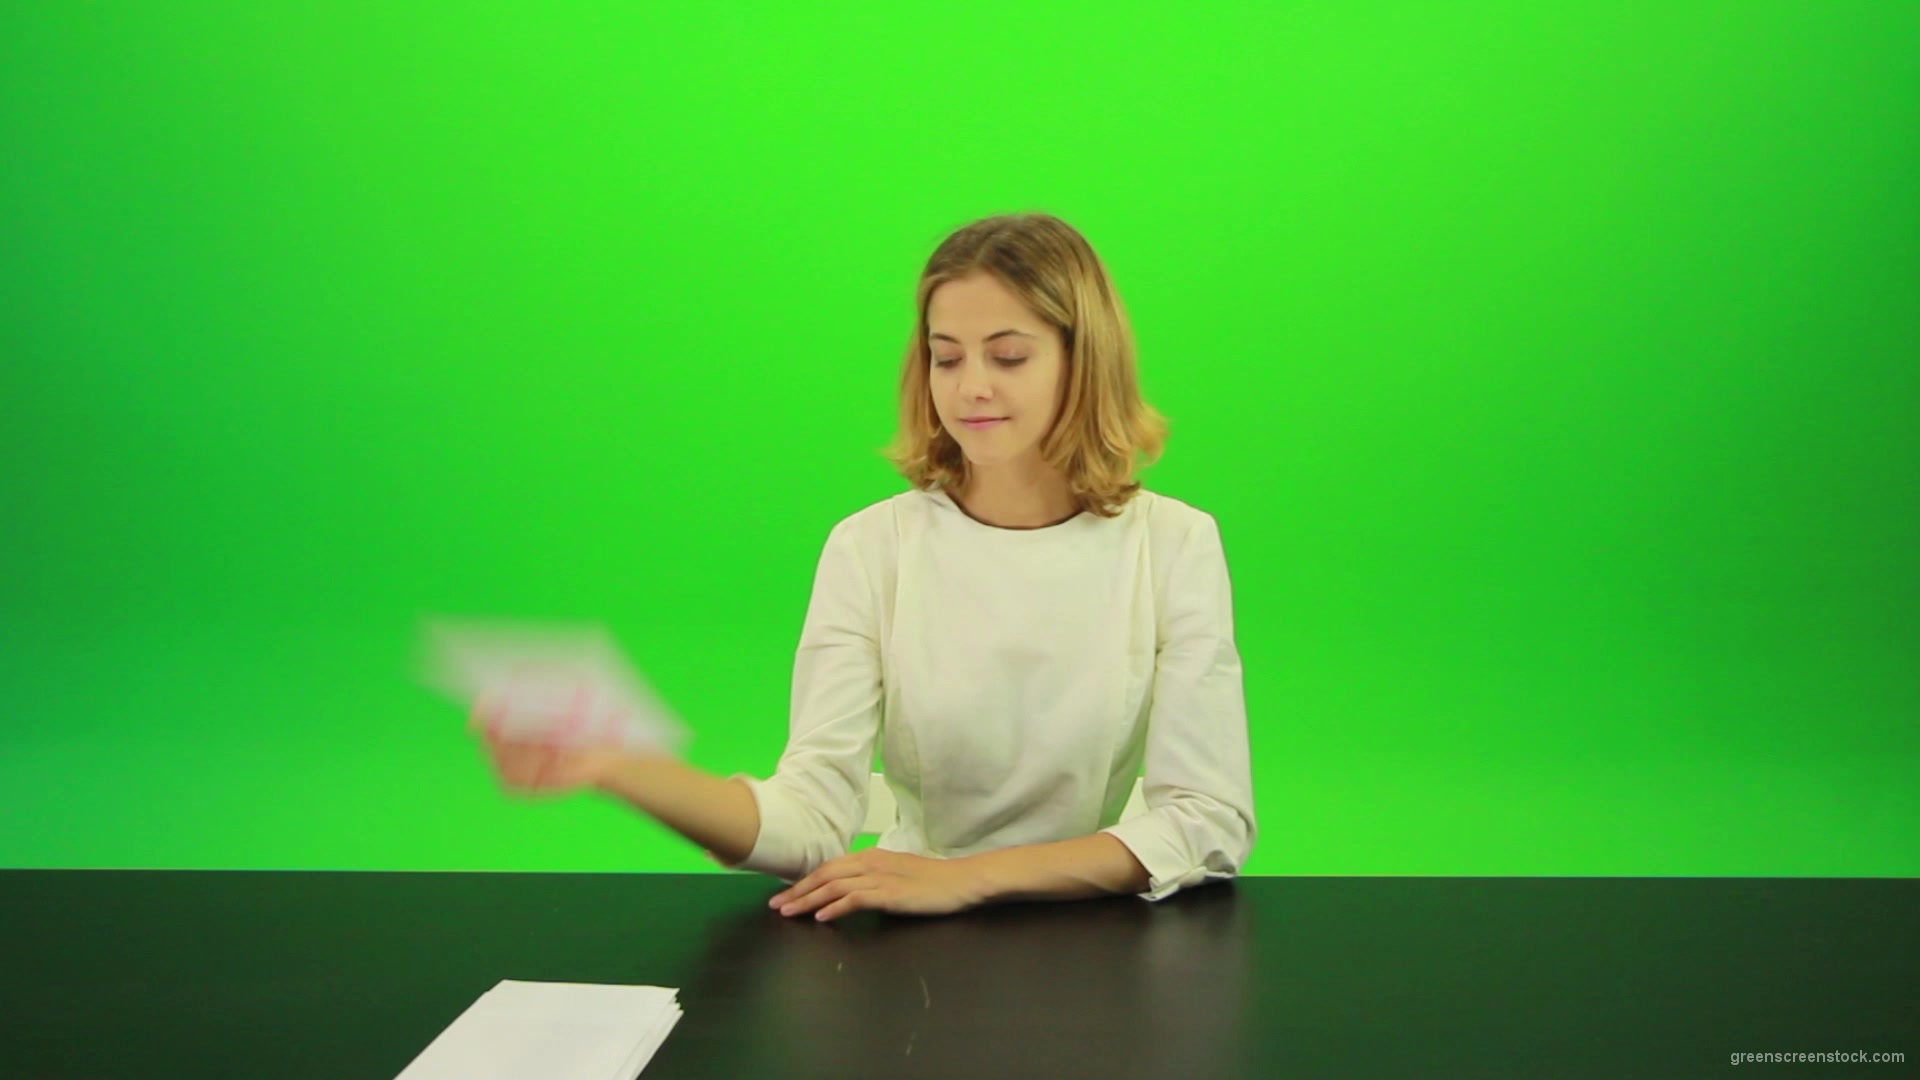 Blonde-hair-girl-in-white-shirt-give-3-point-mark-score-Full-HD-Green-Screen-Video-Footage_007 Green Screen Stock